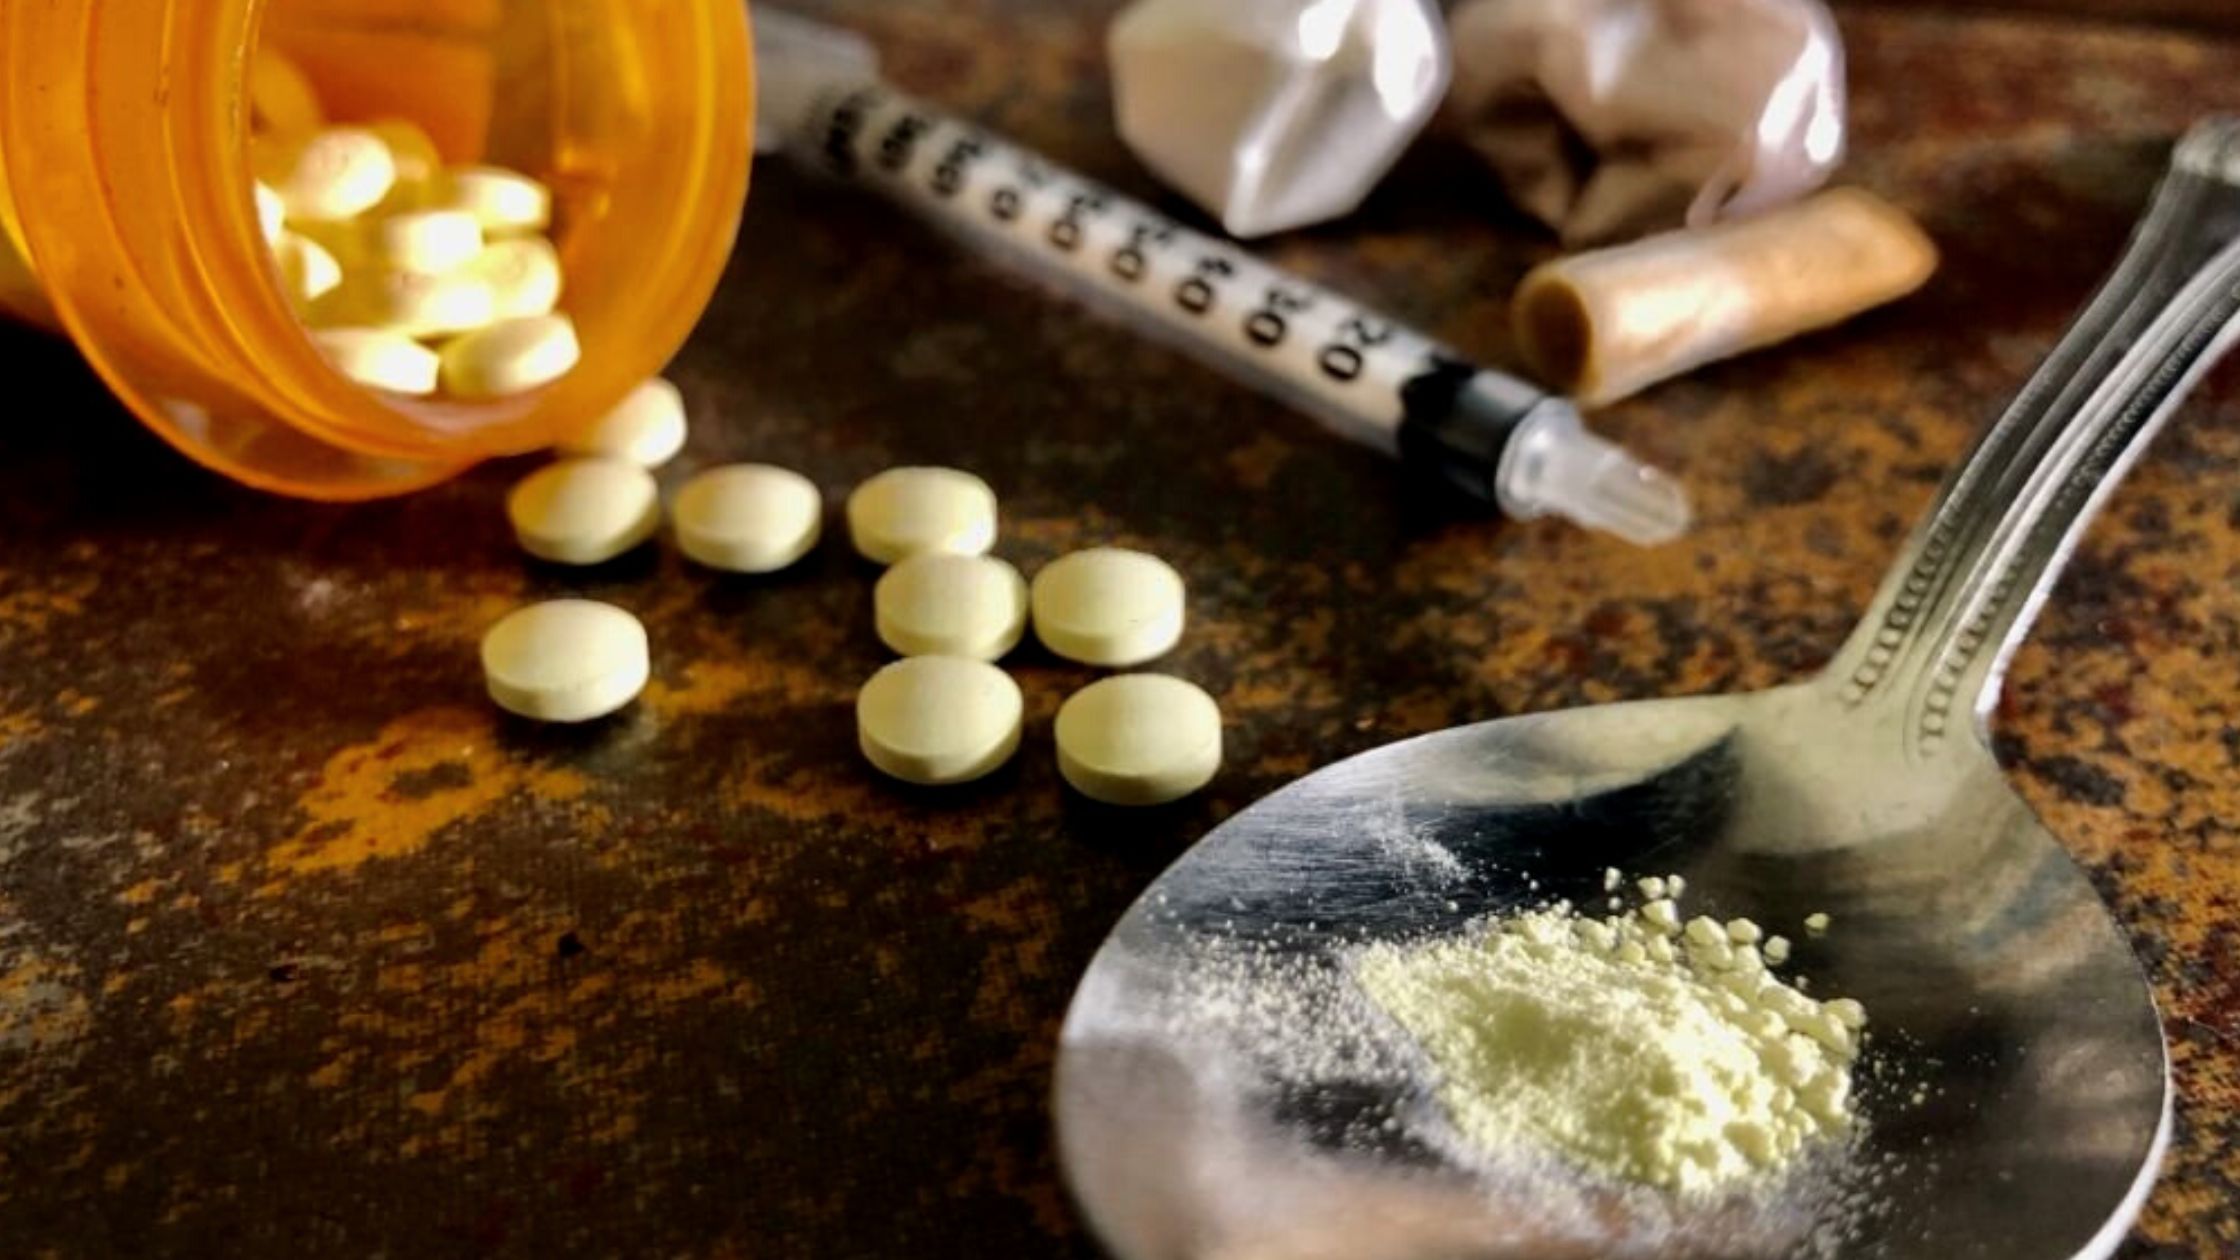 Expect Opioid Overdose Wave To Hit Rural And Urban Areas In The U.S